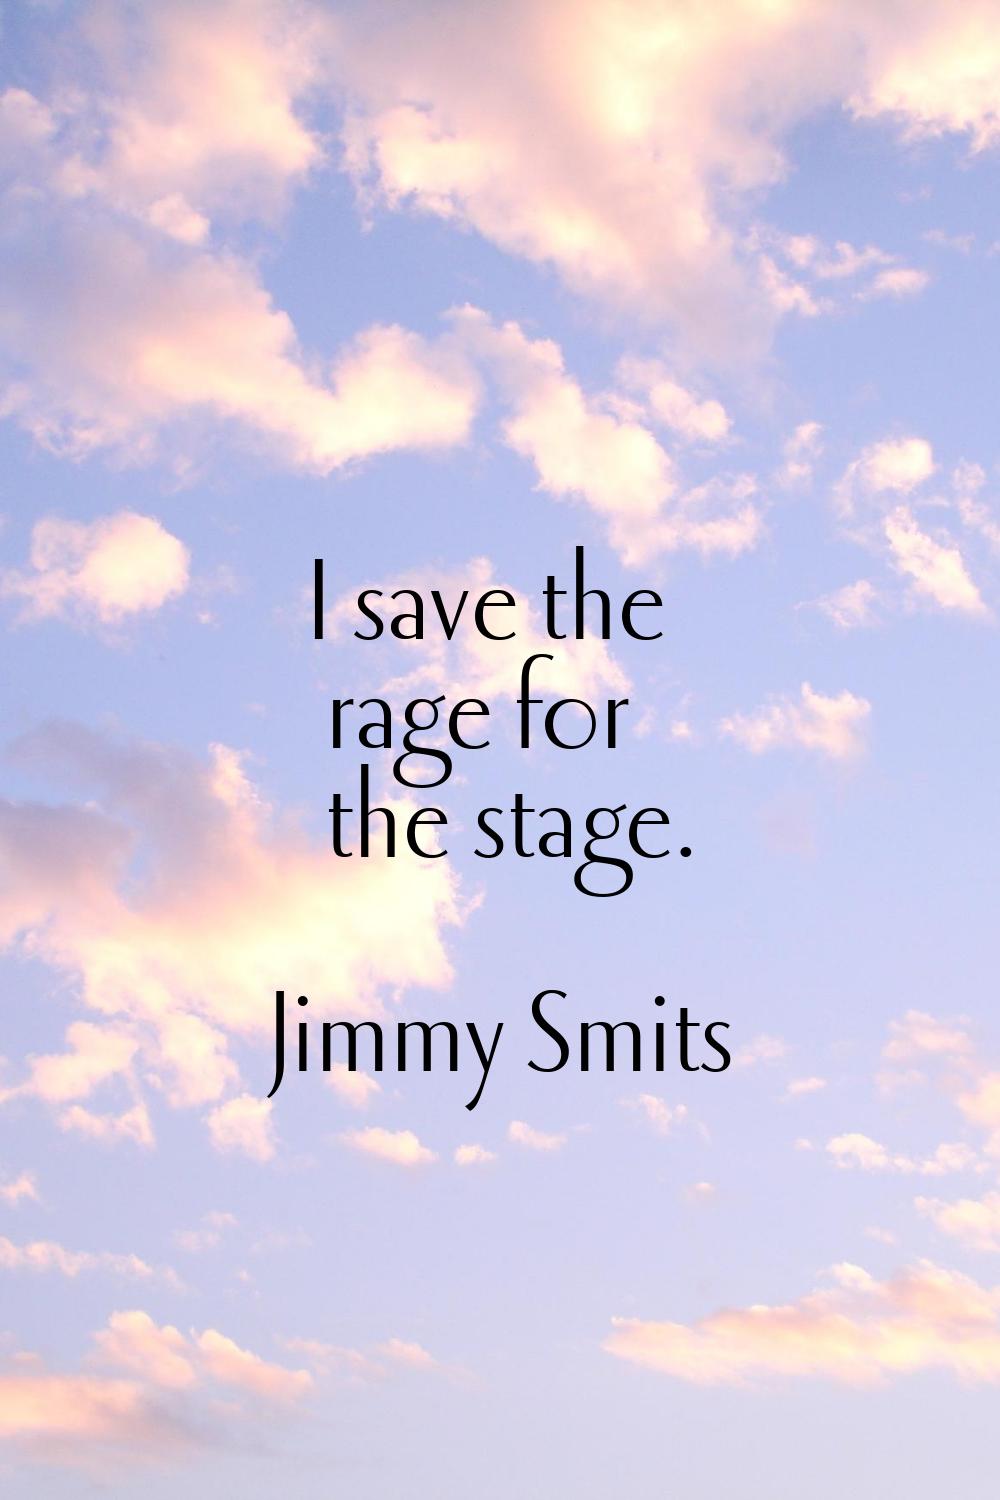 I save the rage for the stage.